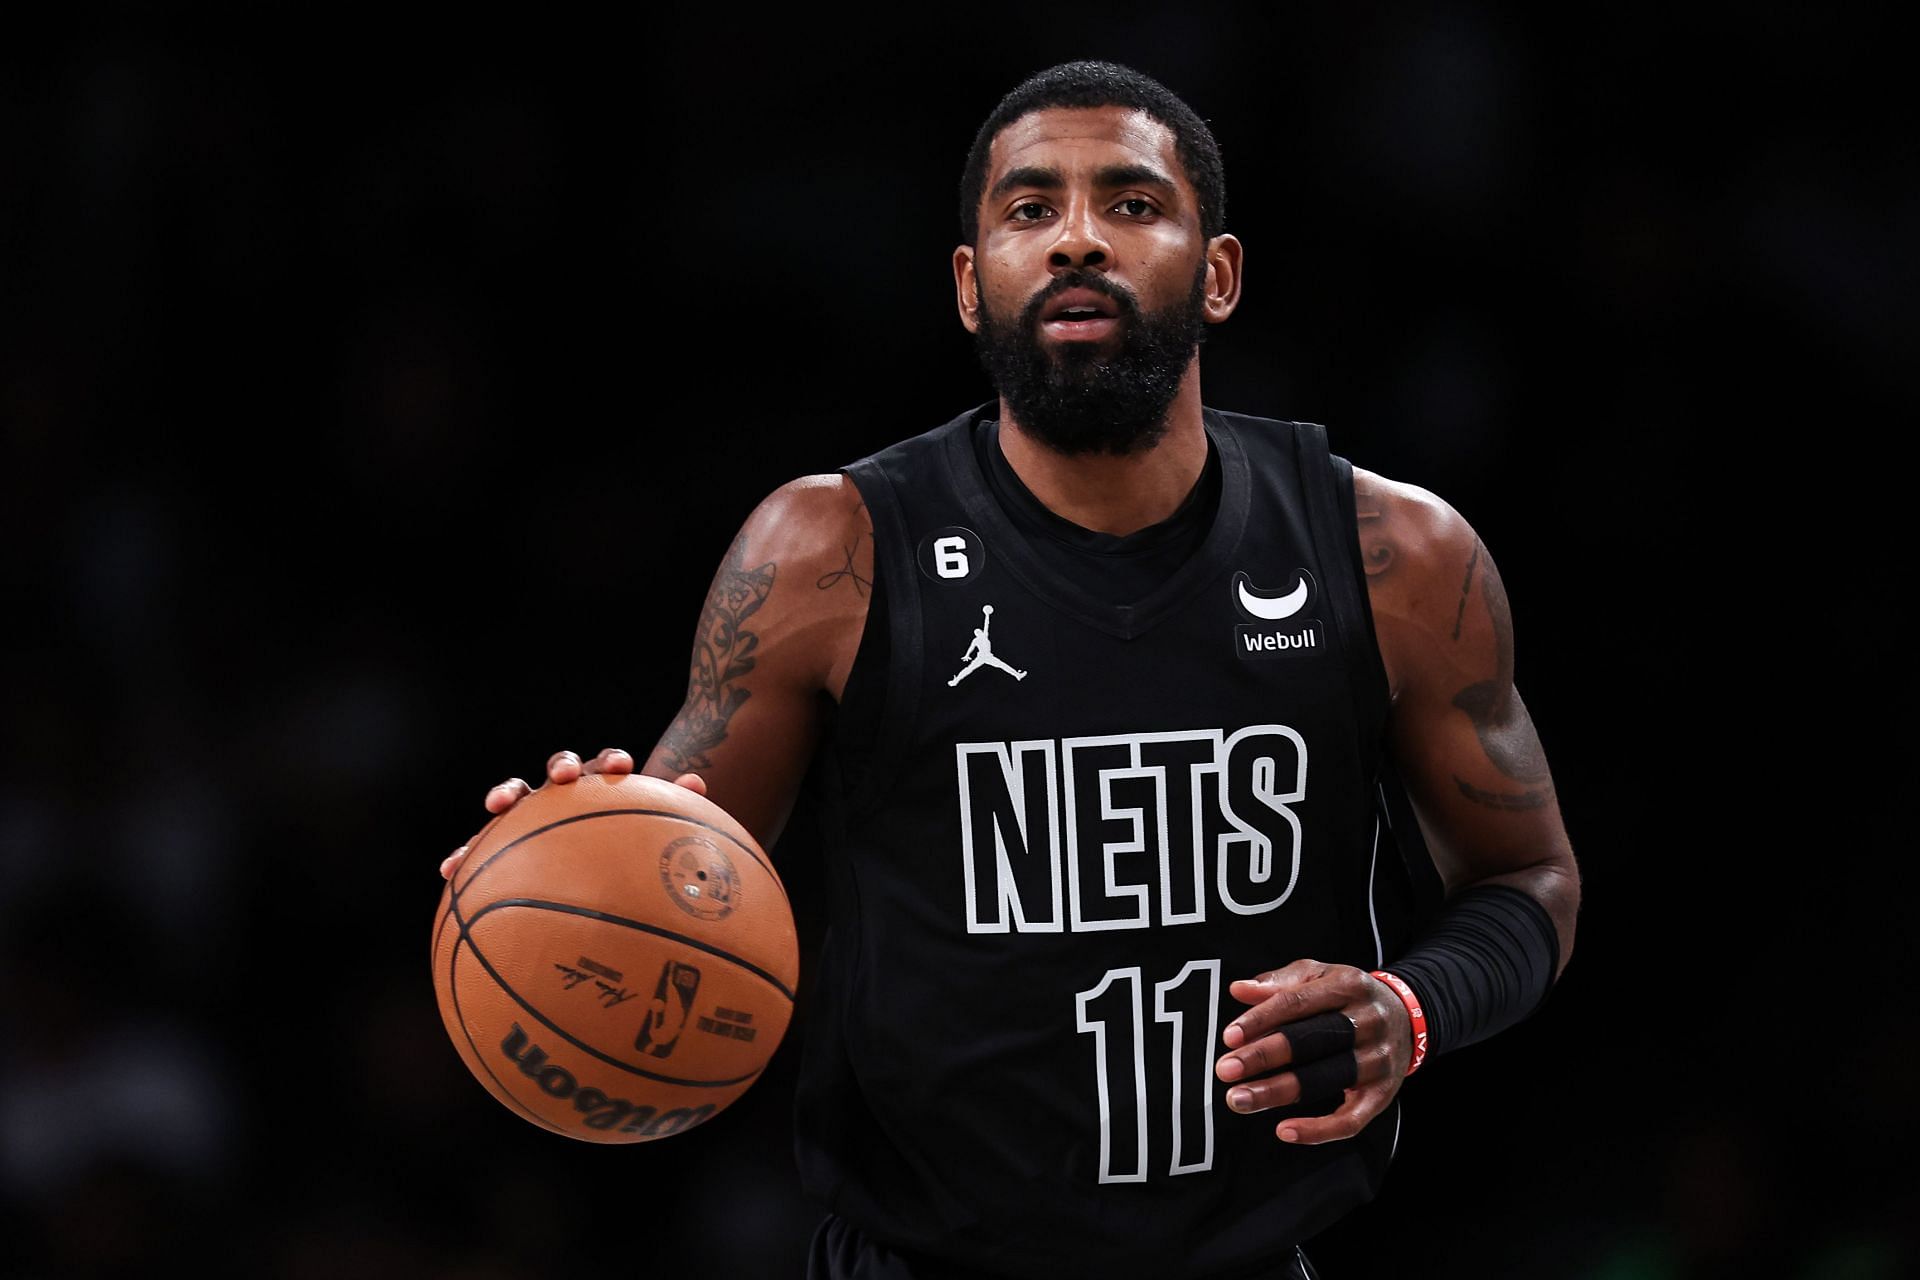 NBA Rumors: This Heat-Nets Trade Features Kyrie Irving